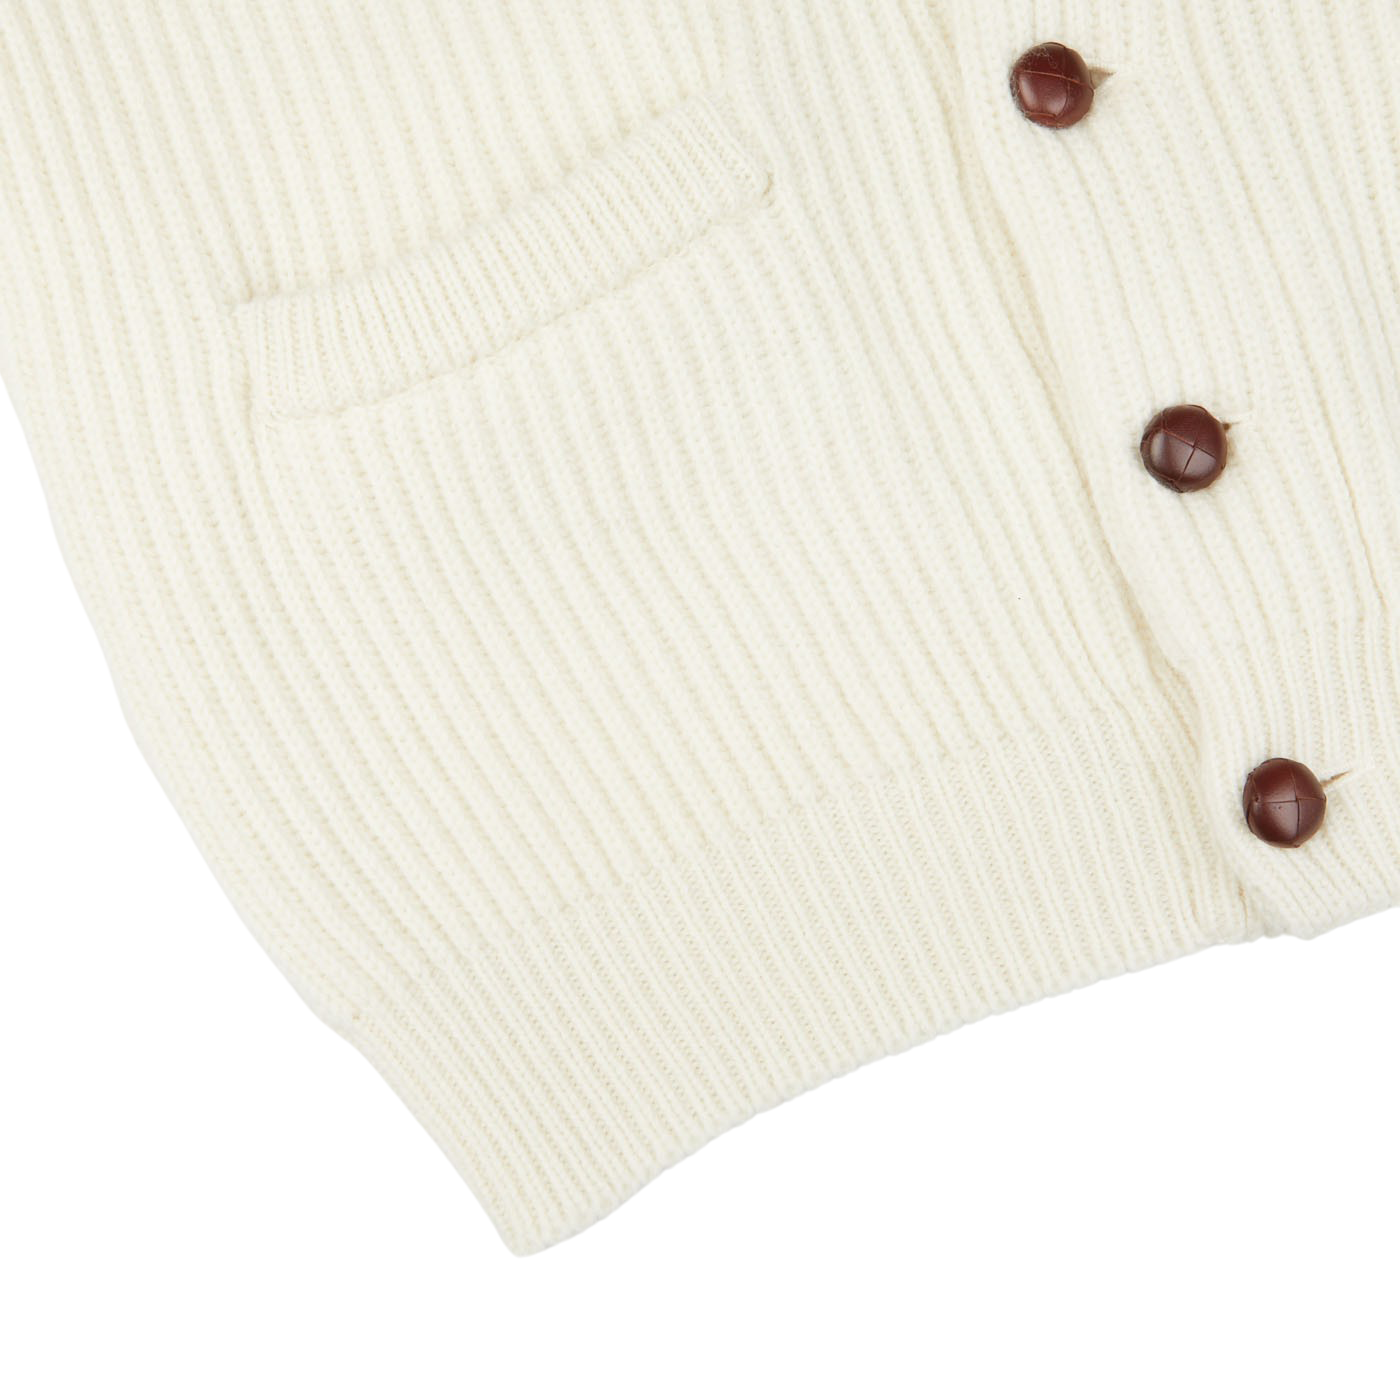 A William Lockie Ecru Beige Lambswool Shawl Collar Cardigan, featuring buttons on the front.